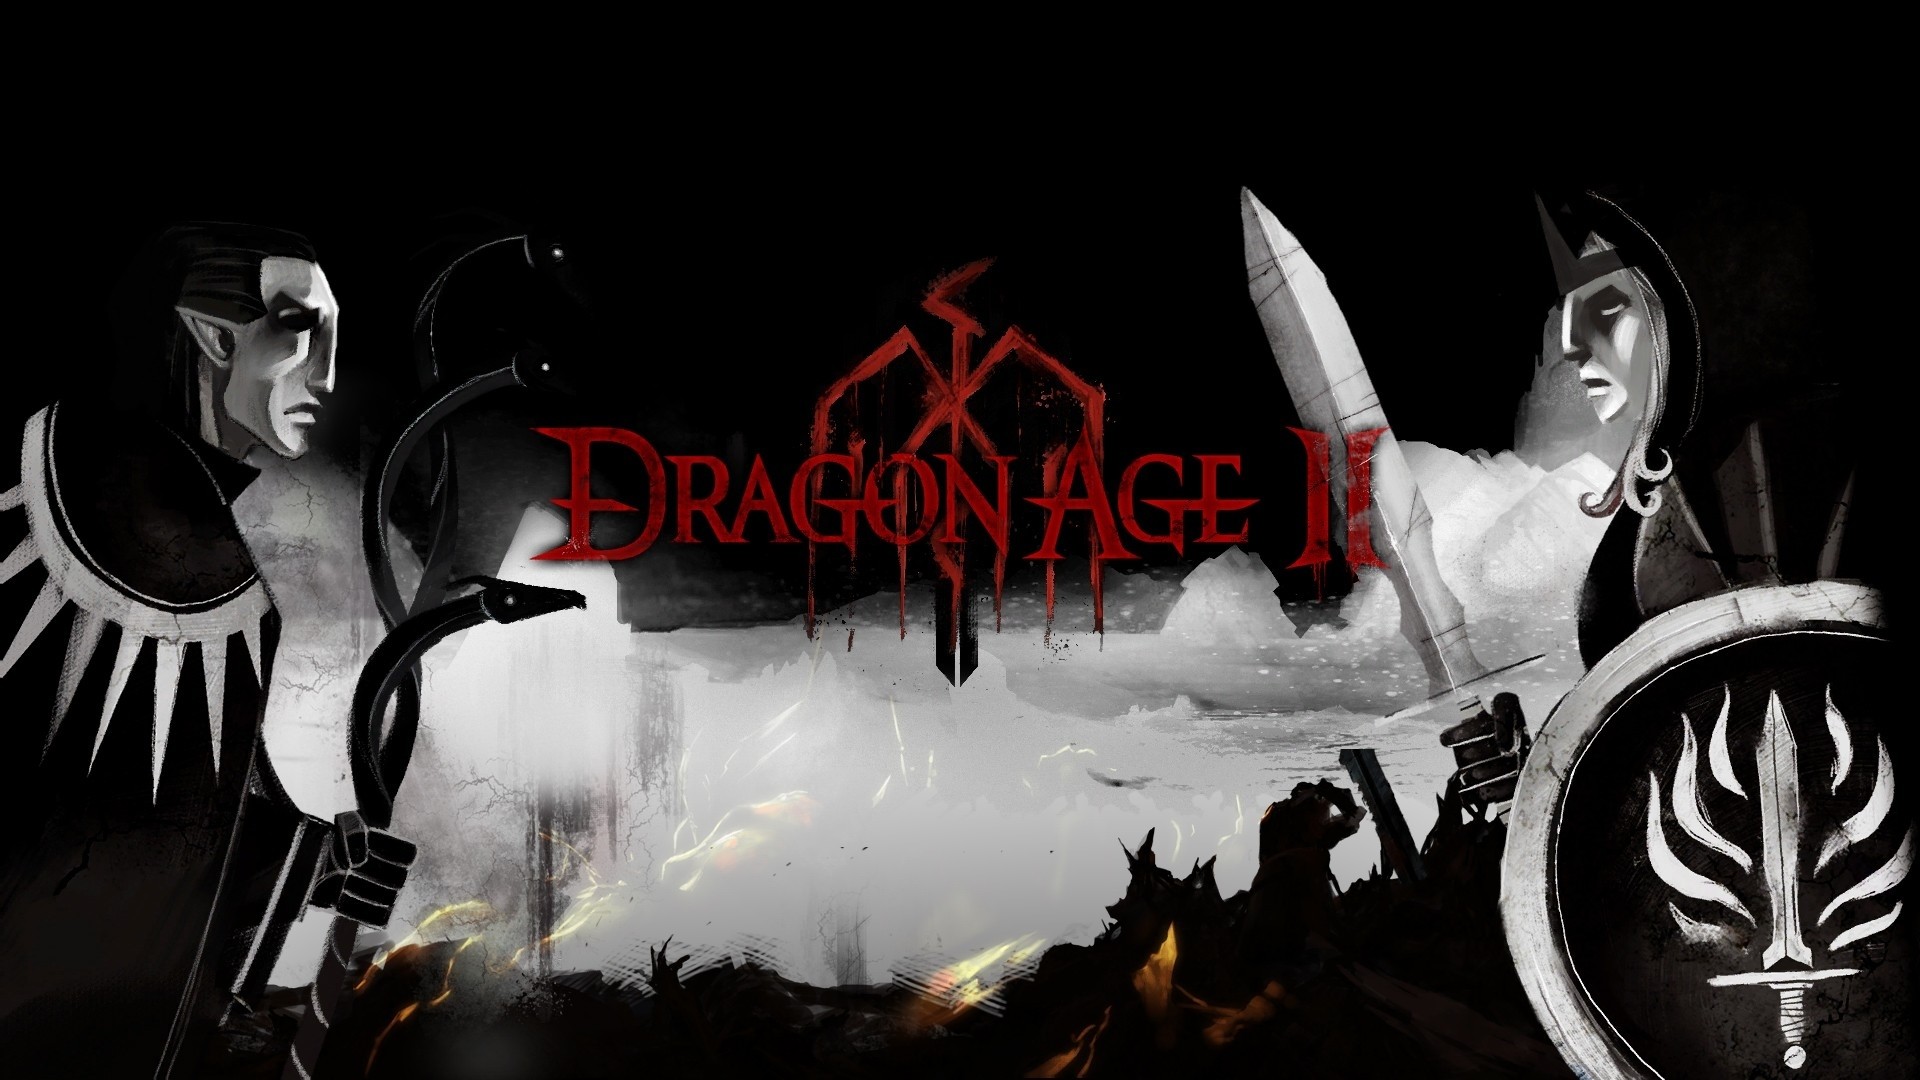 1920x1080 Title : dragon age ii full hd wallpaper and background image | 1920Ã1080.  Dimension : 1920 x 1080. File Type : JPG/JPEG